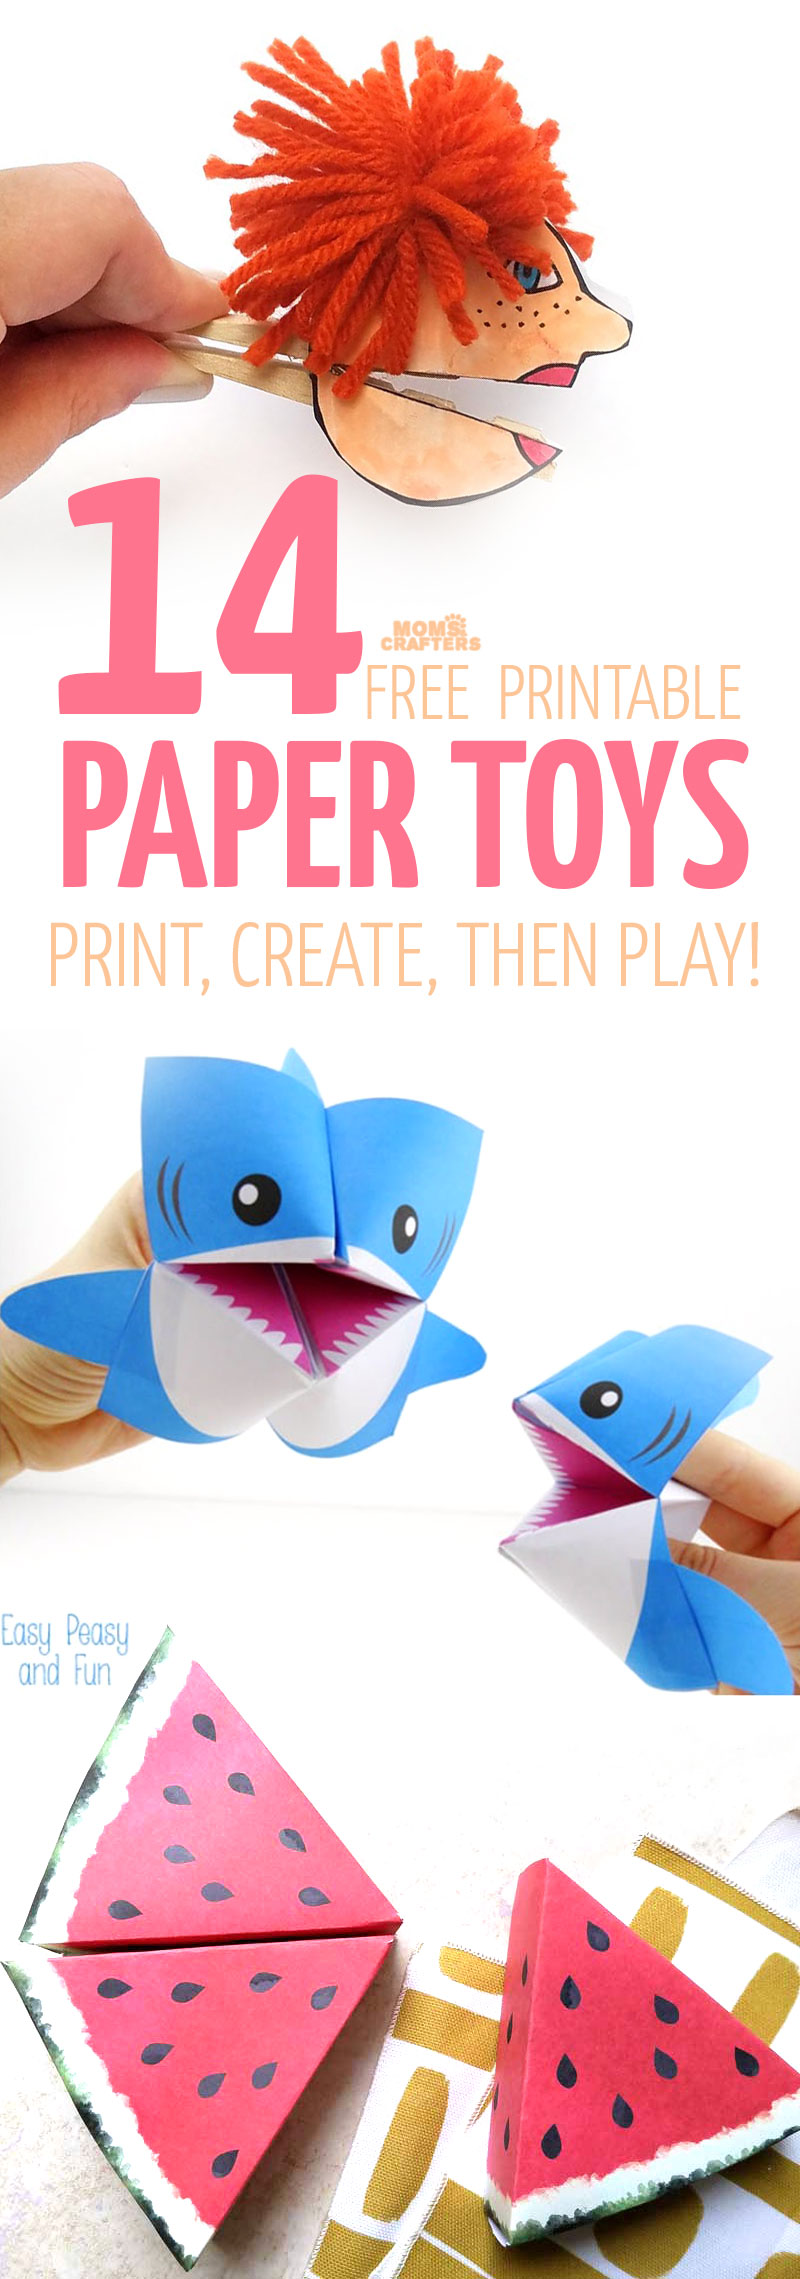 I love paper toy templates - you can really refresh them frequently, and then recycle them when you're done. These free printables for play make awesome paper crafts for kids and adults and provide so much pretend play opportunities too!